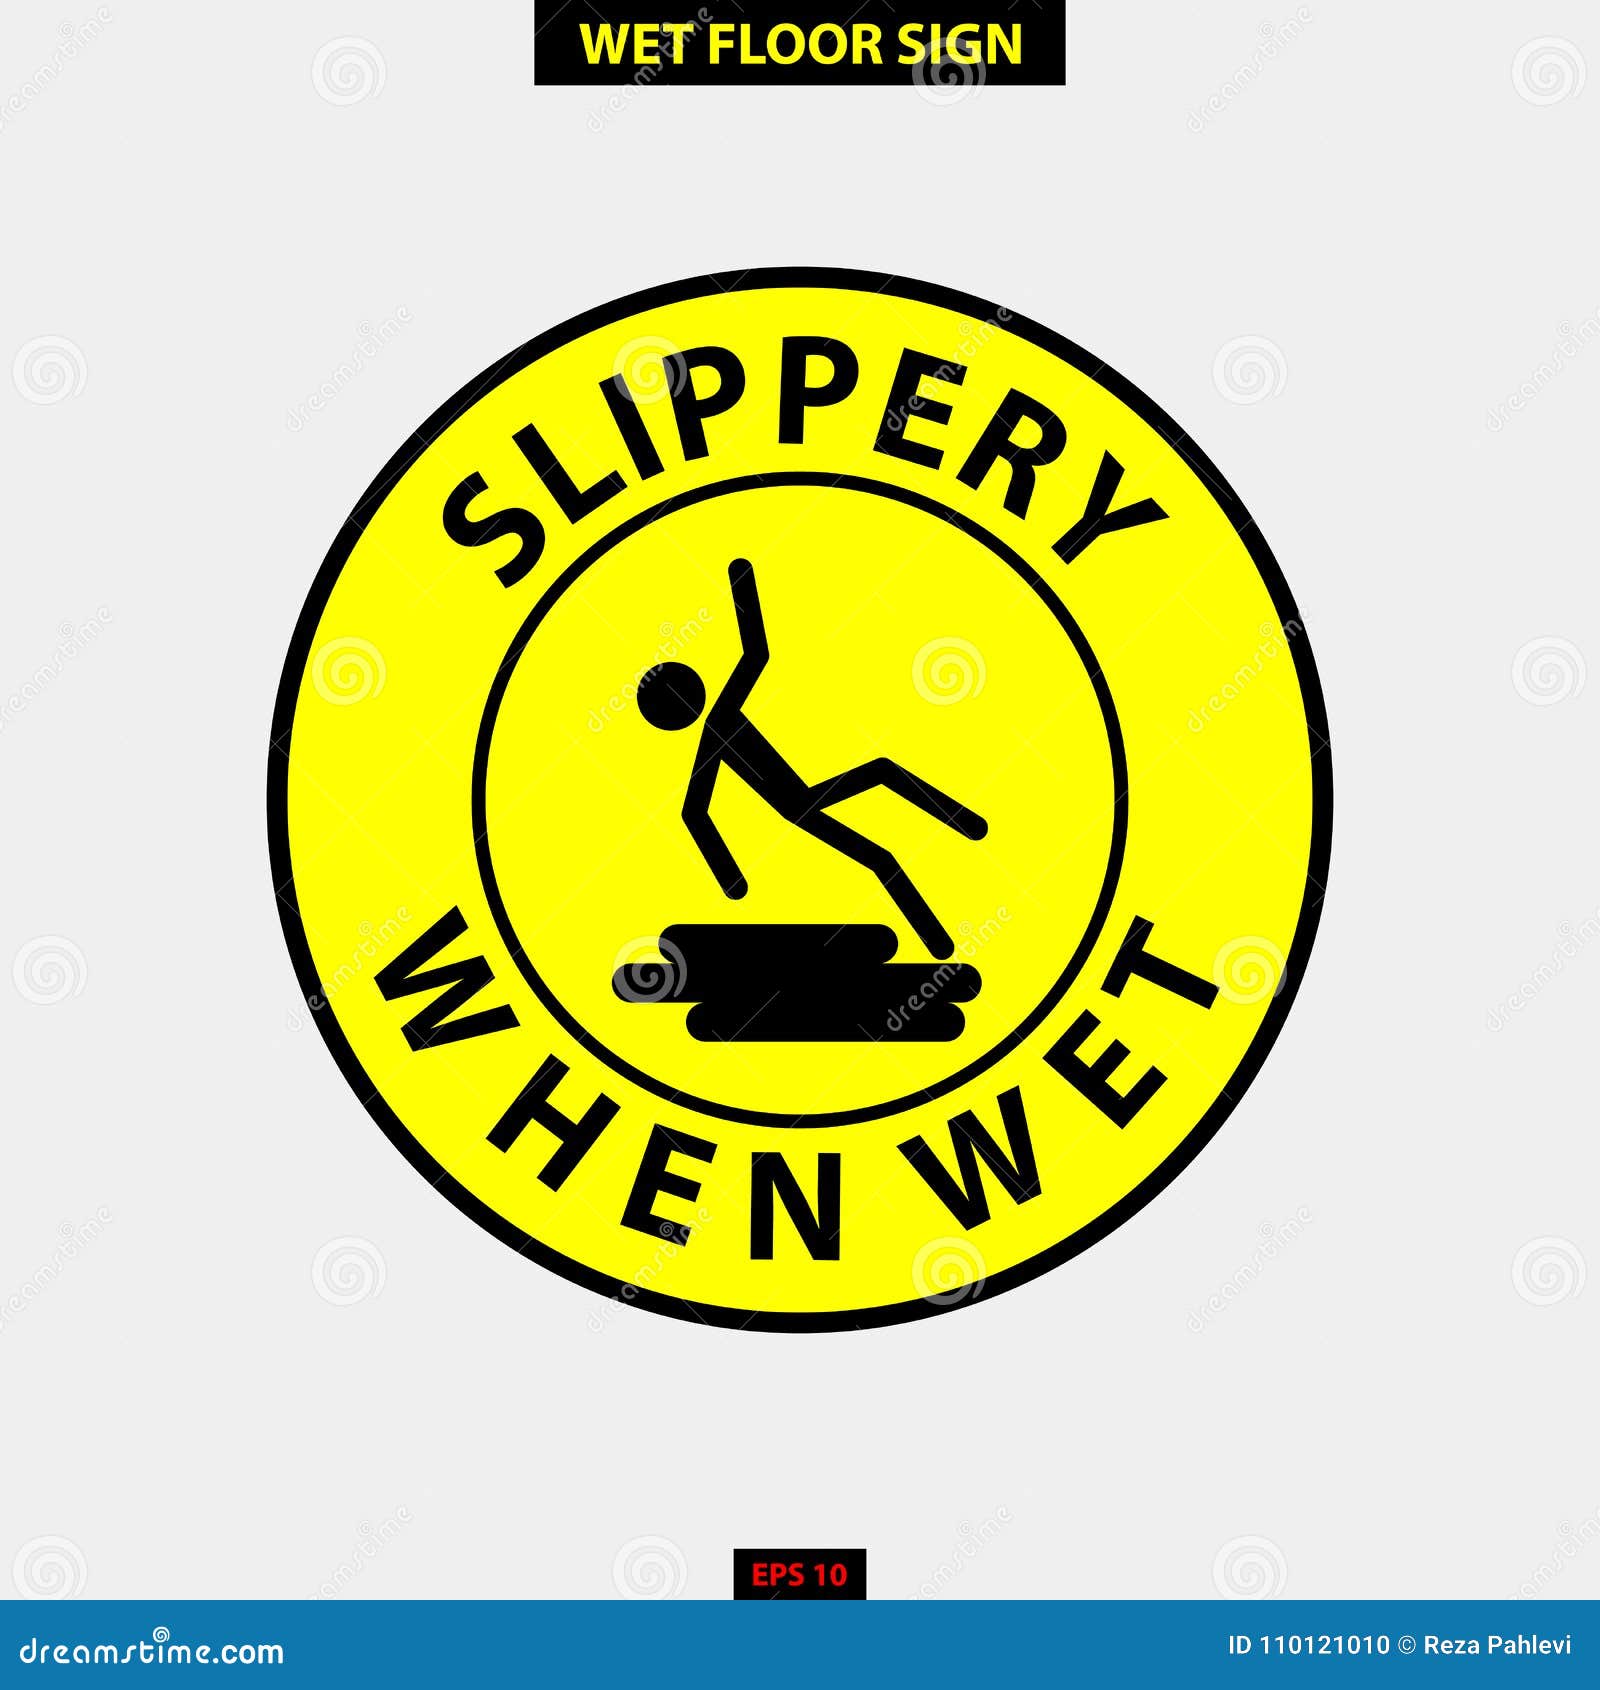 Keep wet floors as they are slippery